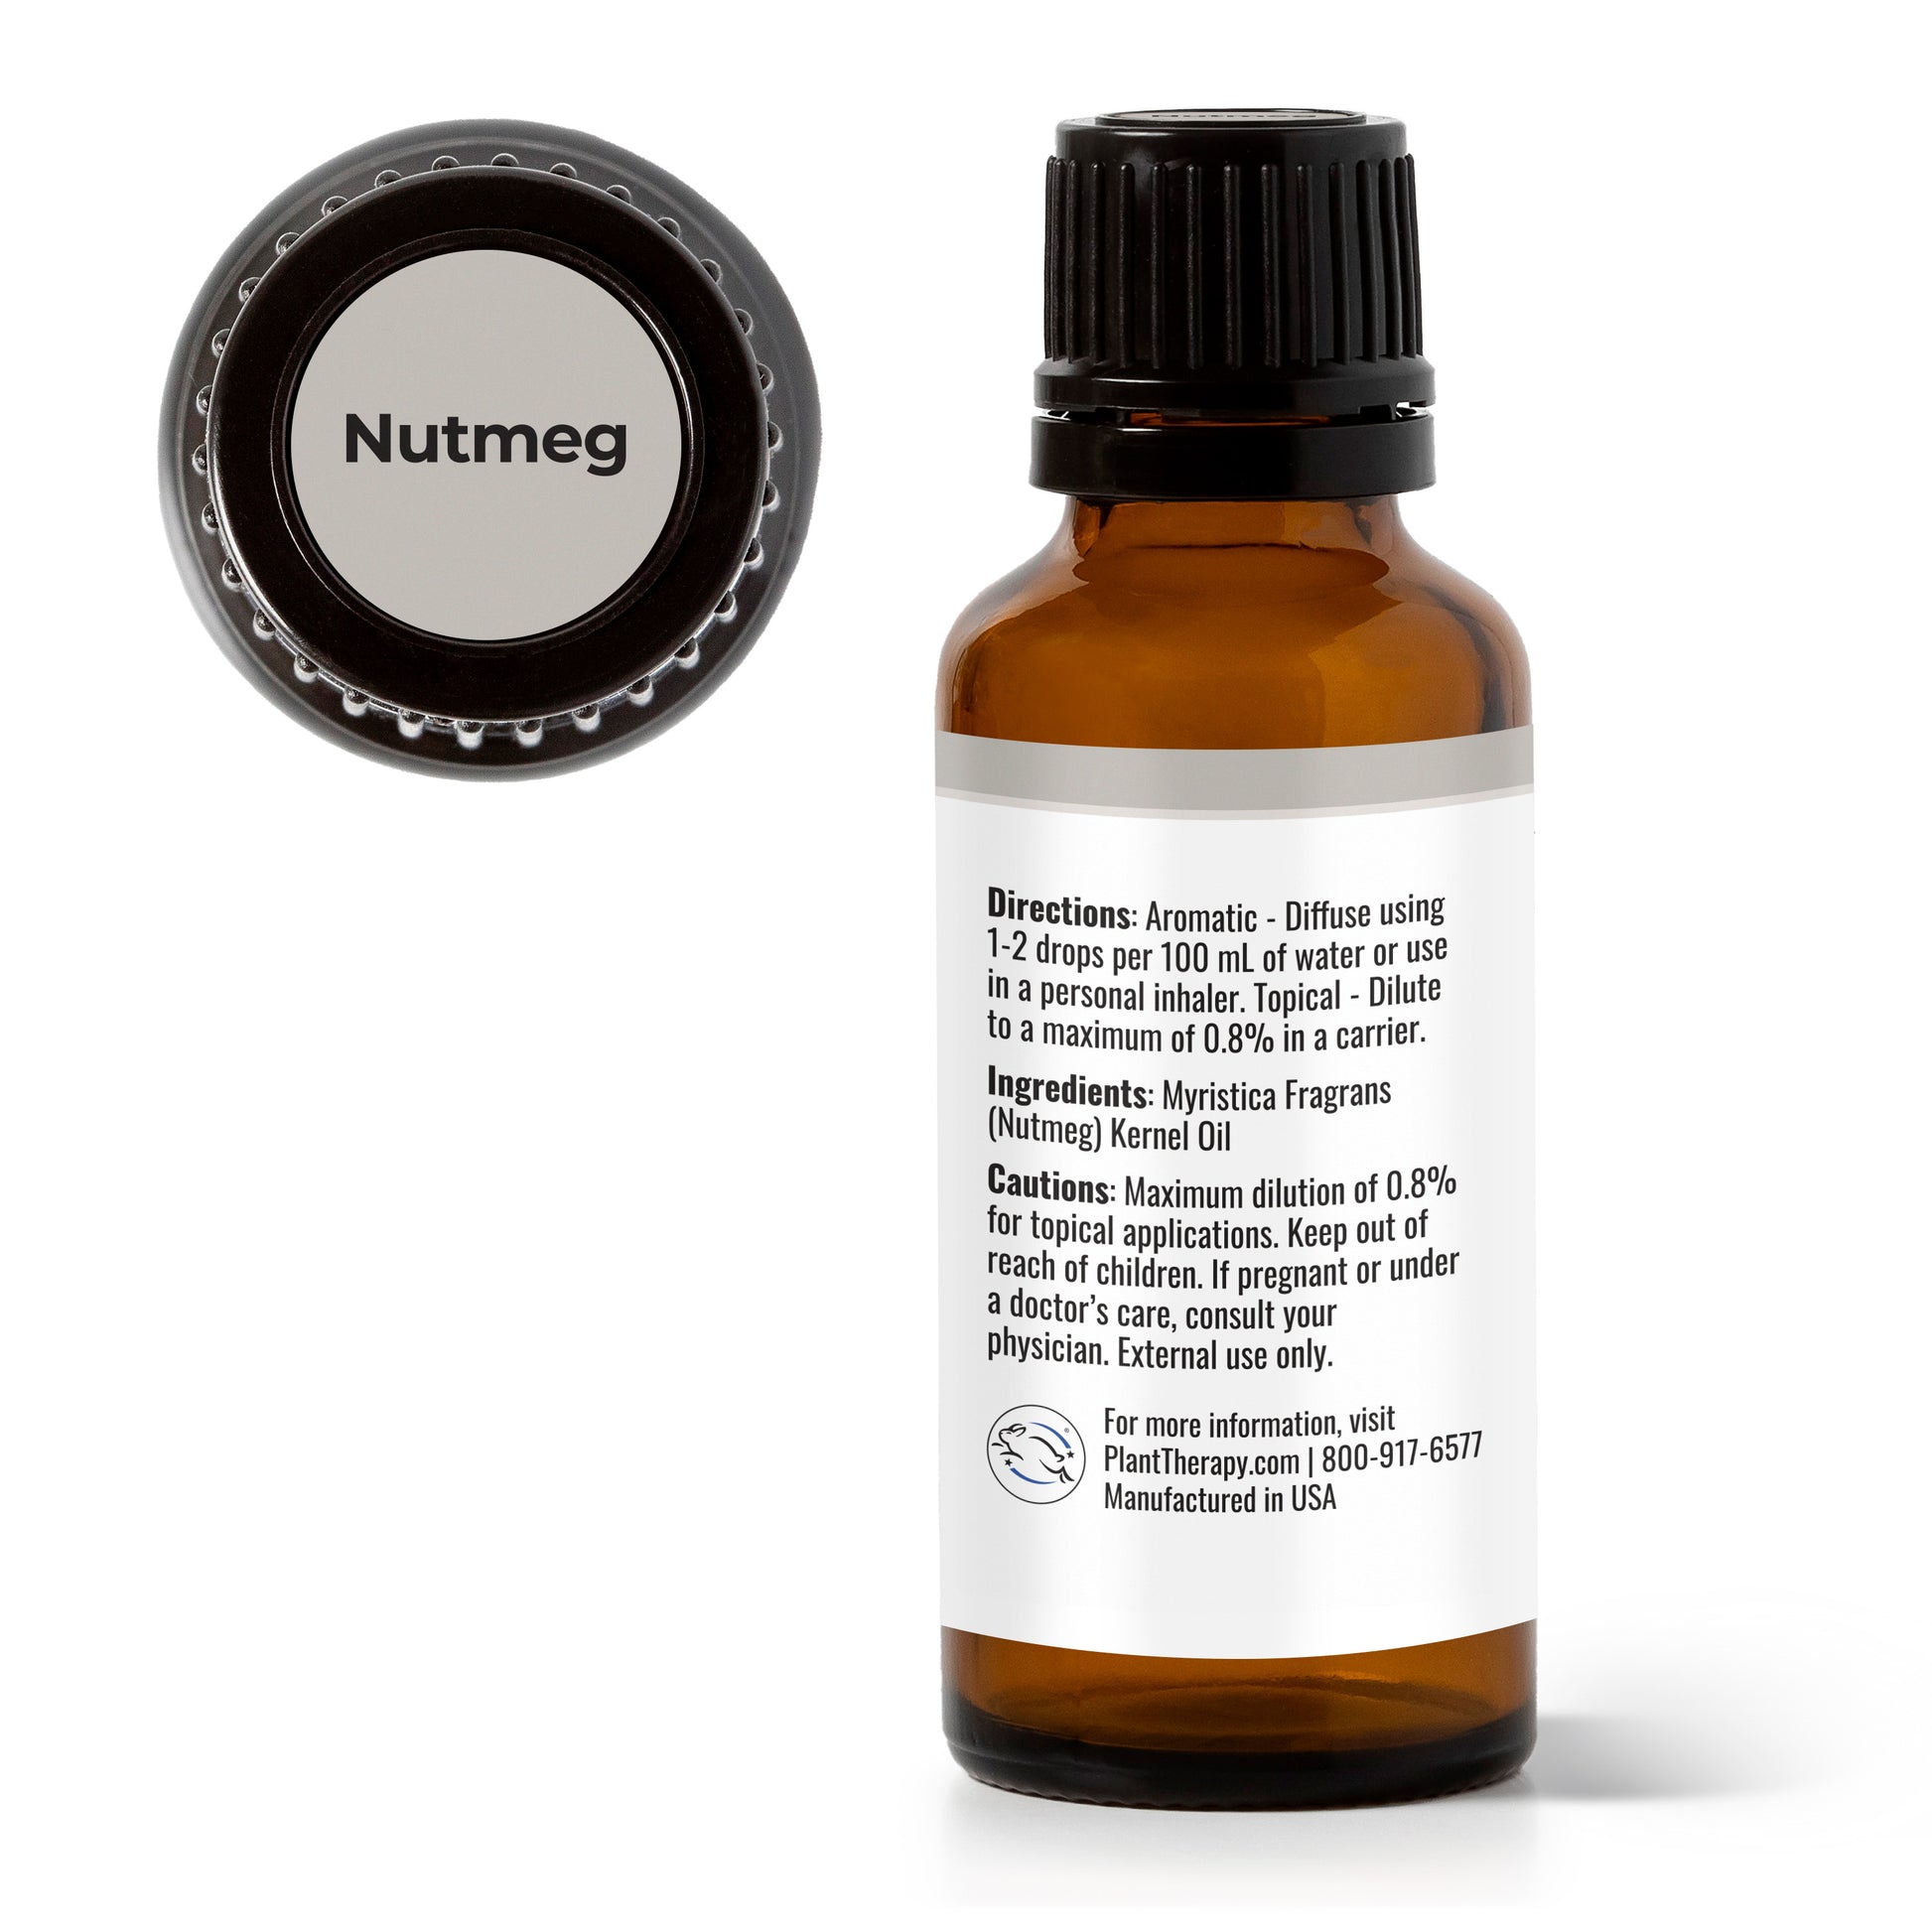 Plant Therapy Nutmeg Essential Oil 10 ml (1/3 oz) 100% Pure, Undiluted, Therapeutic Grade